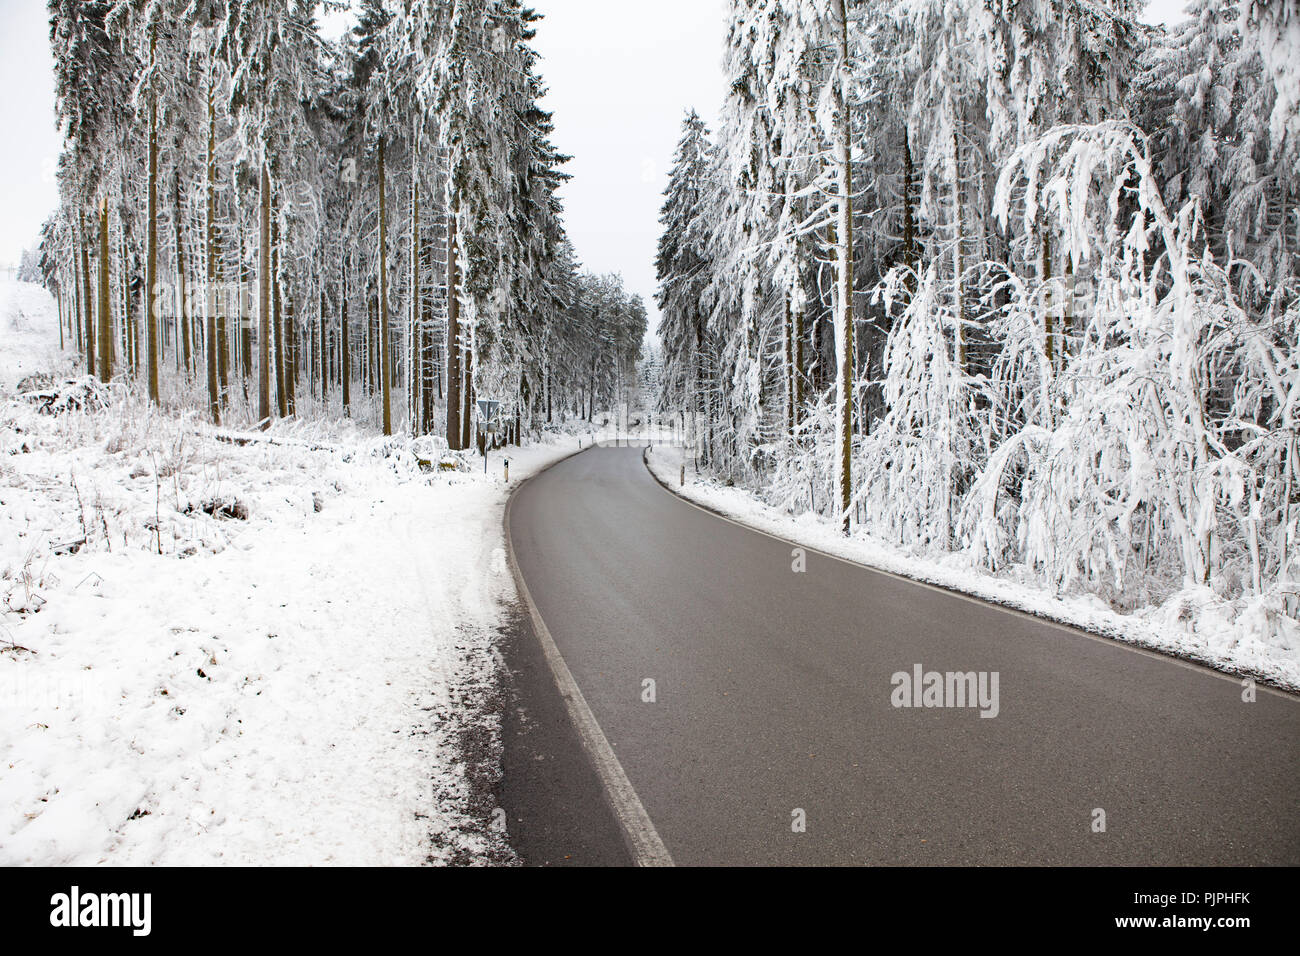 snowy landscape and streets, Winter Stock Photo